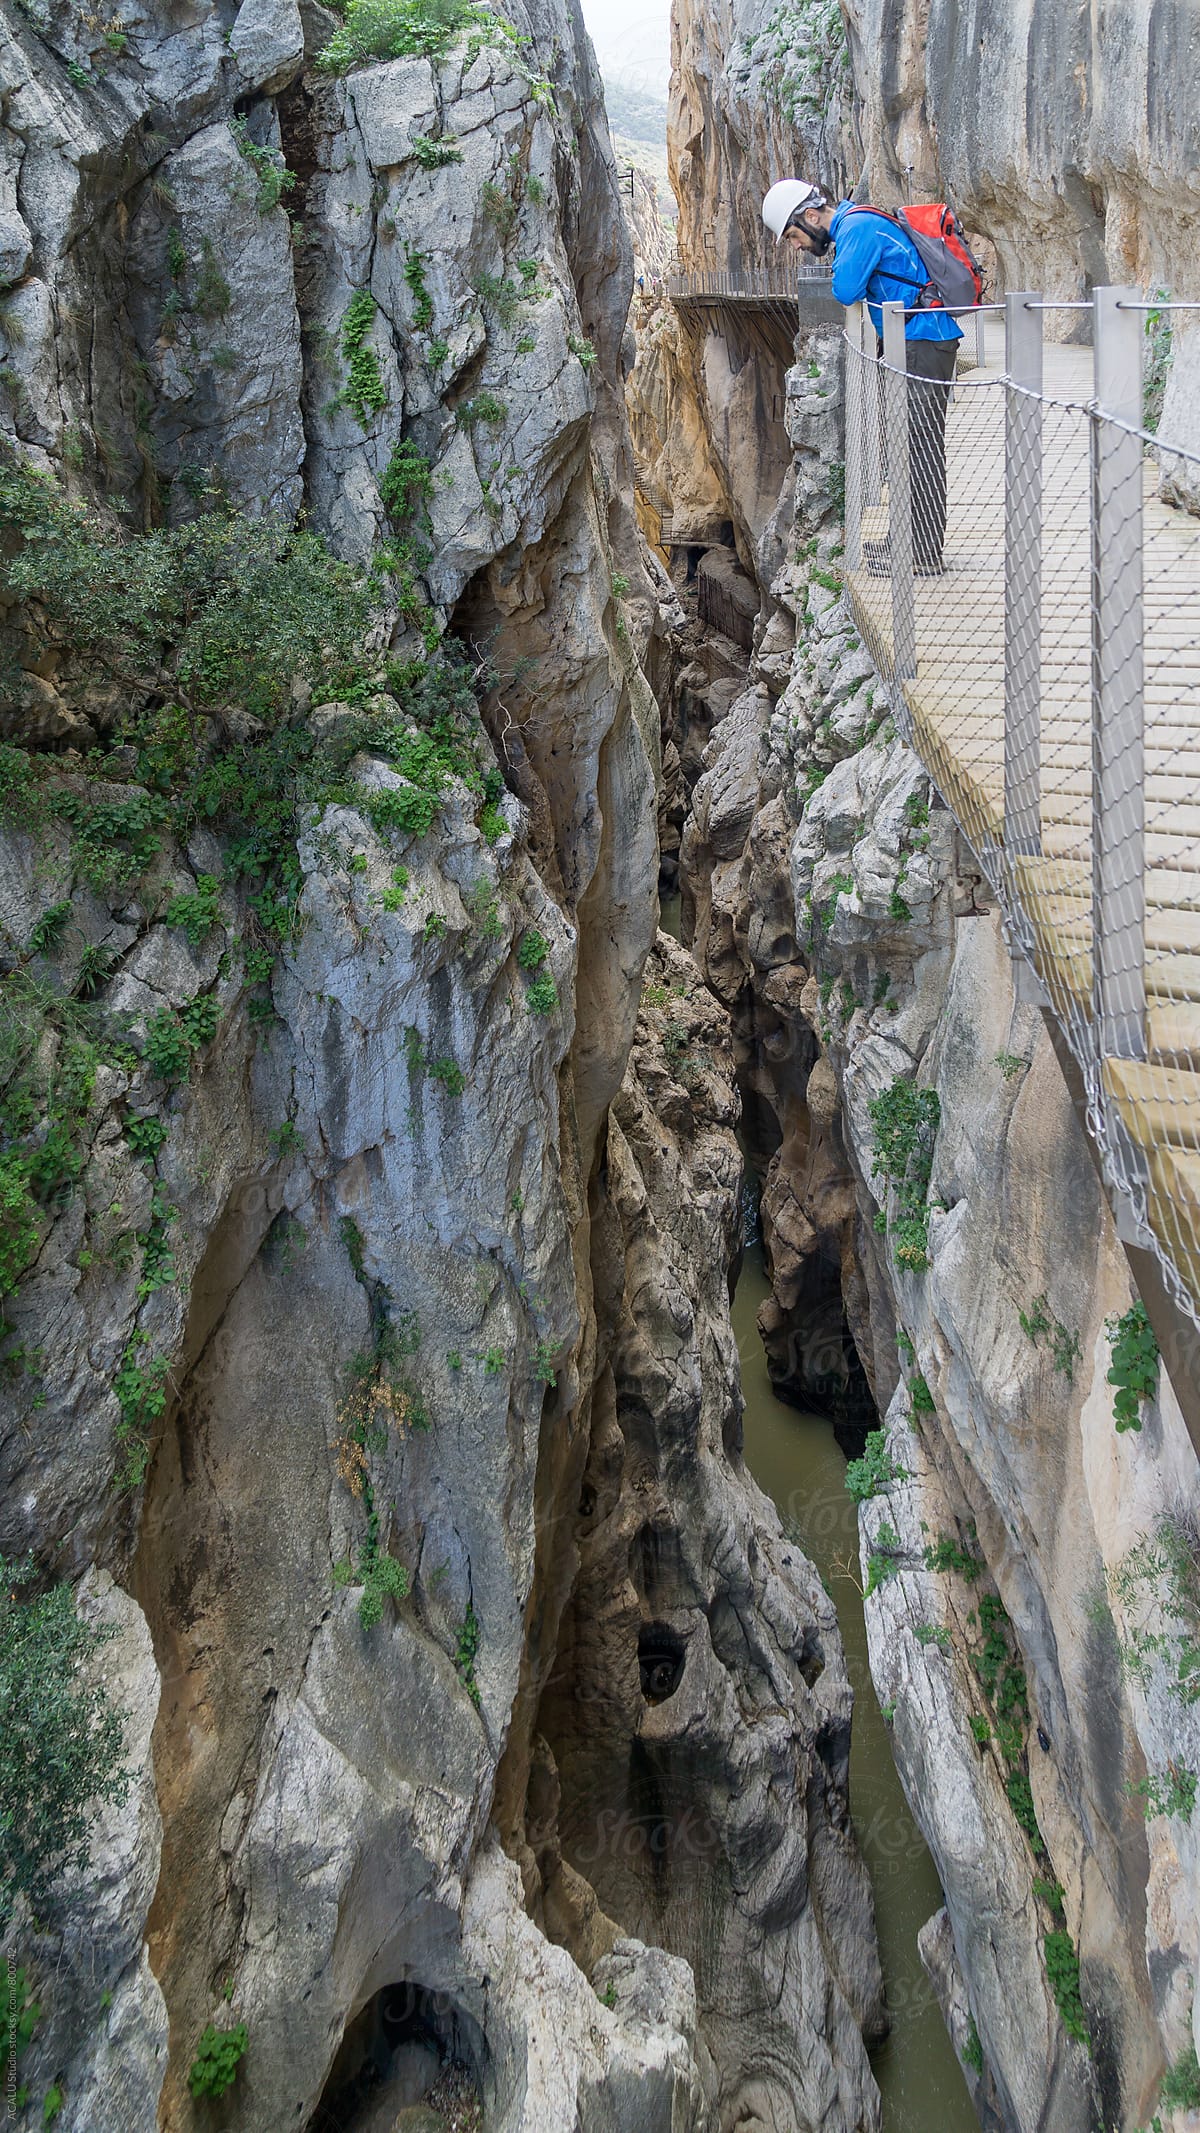 Climber looking down at the edge of a cliff in Caminito del Rey